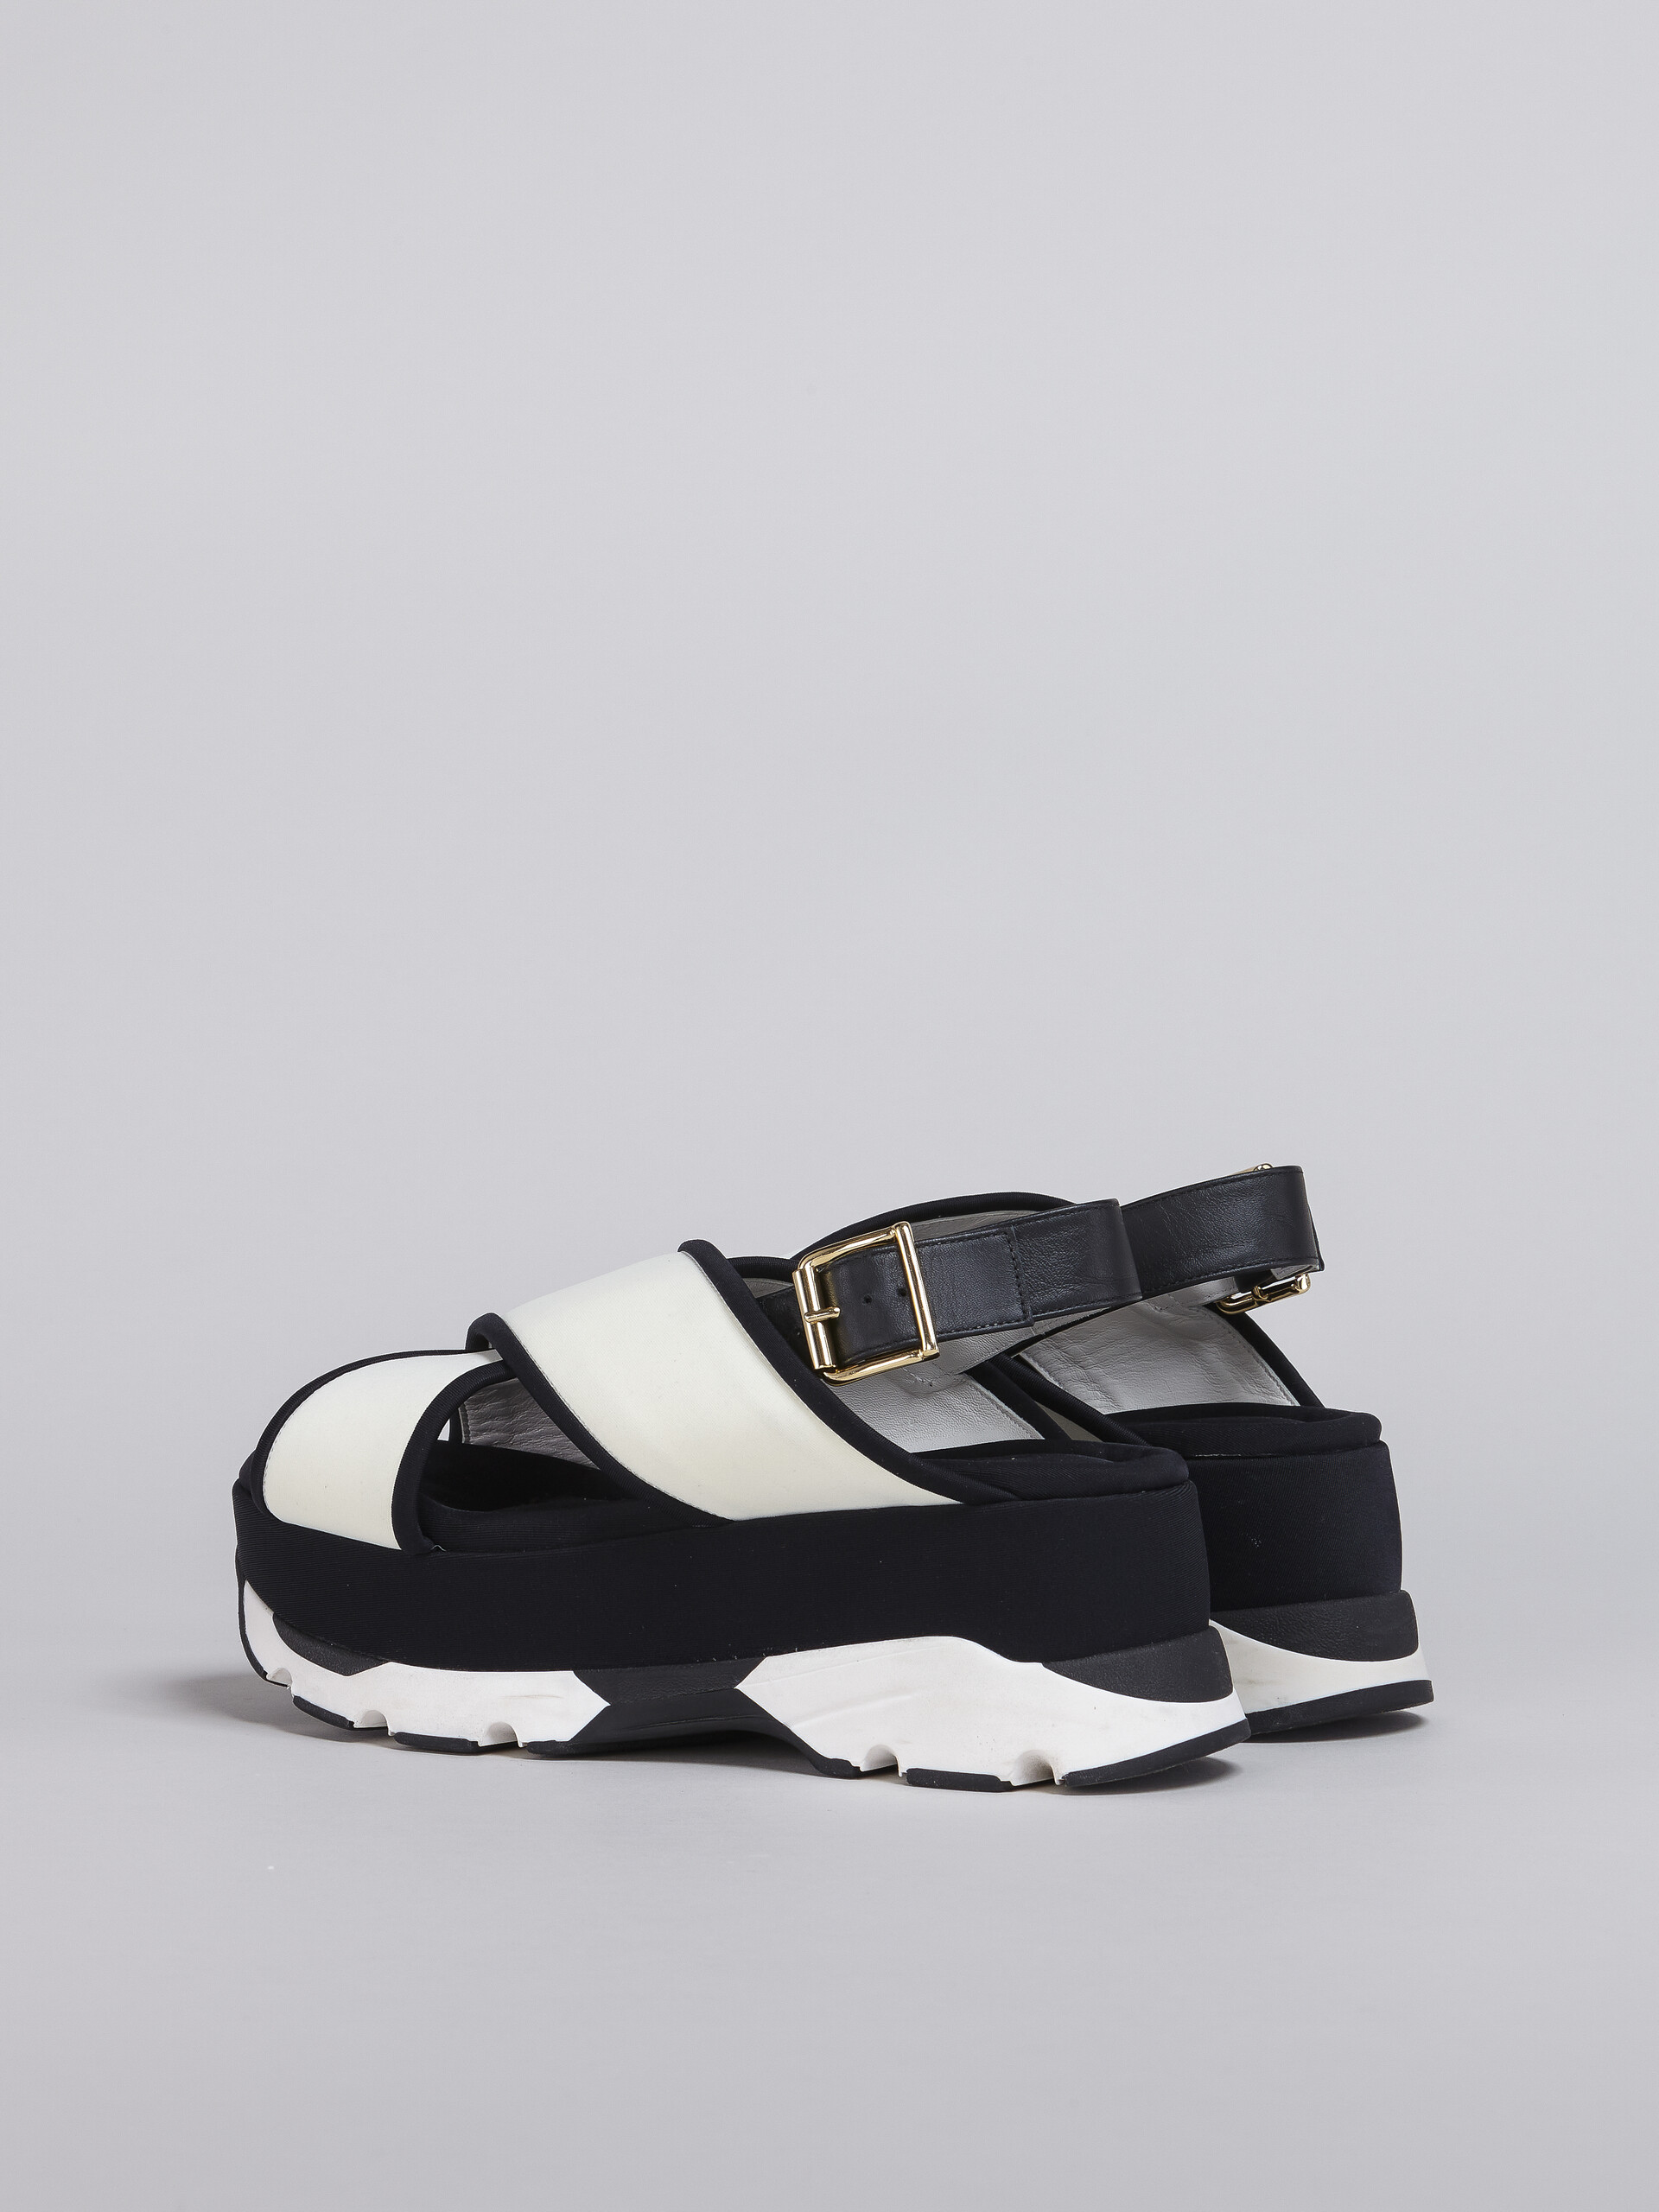 White and black technical fabric wedge sandal - Sandals - Image 3